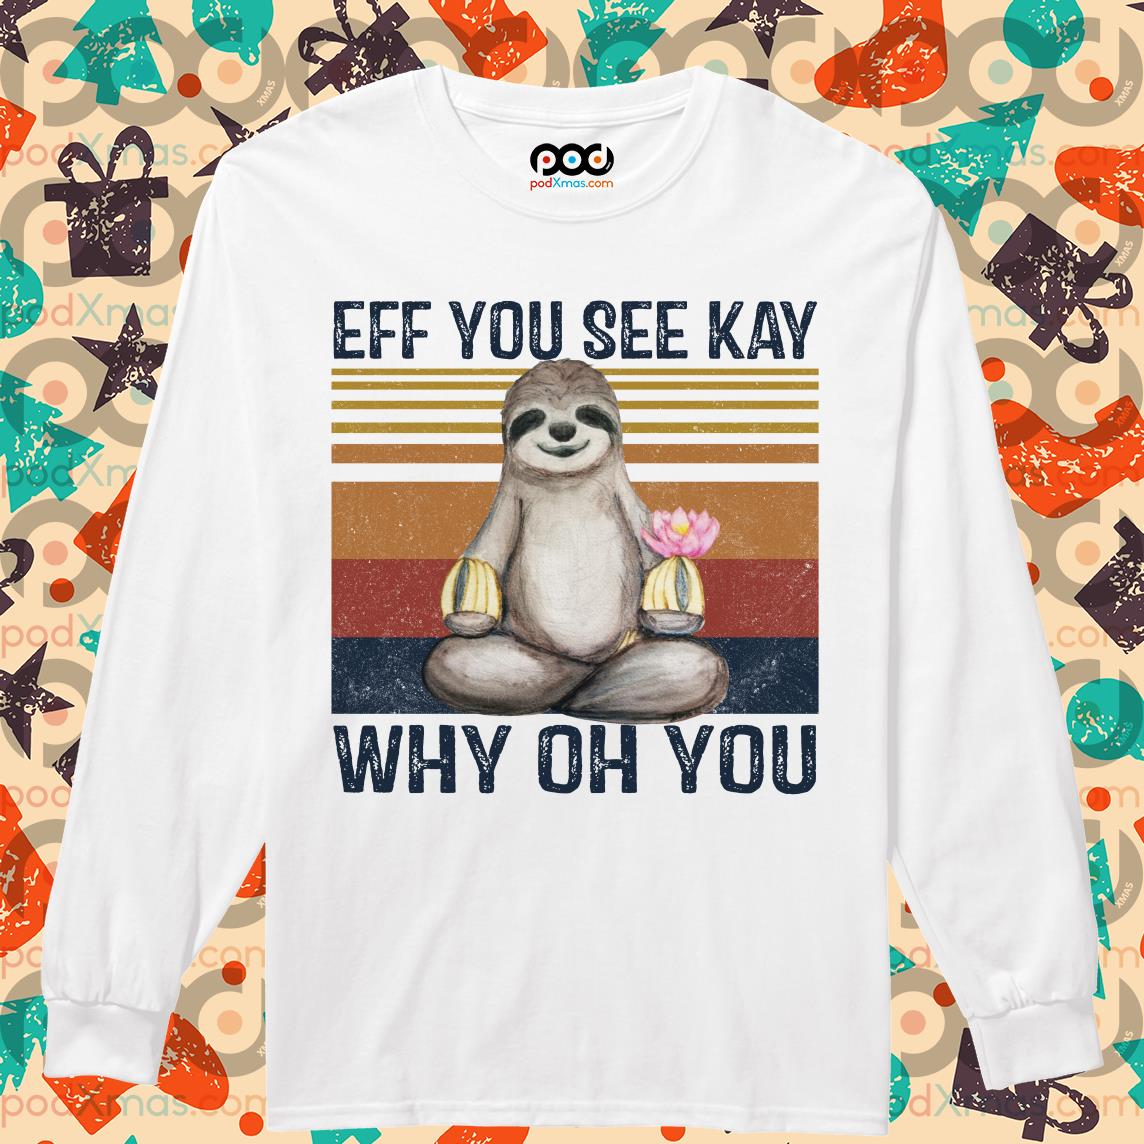 Eff you see kay why oh you funny Yoga Sloth Eff You See Kay why oh You Funny Meditating Sloth with Lotus Throw Pillow Multicolor 16x16 